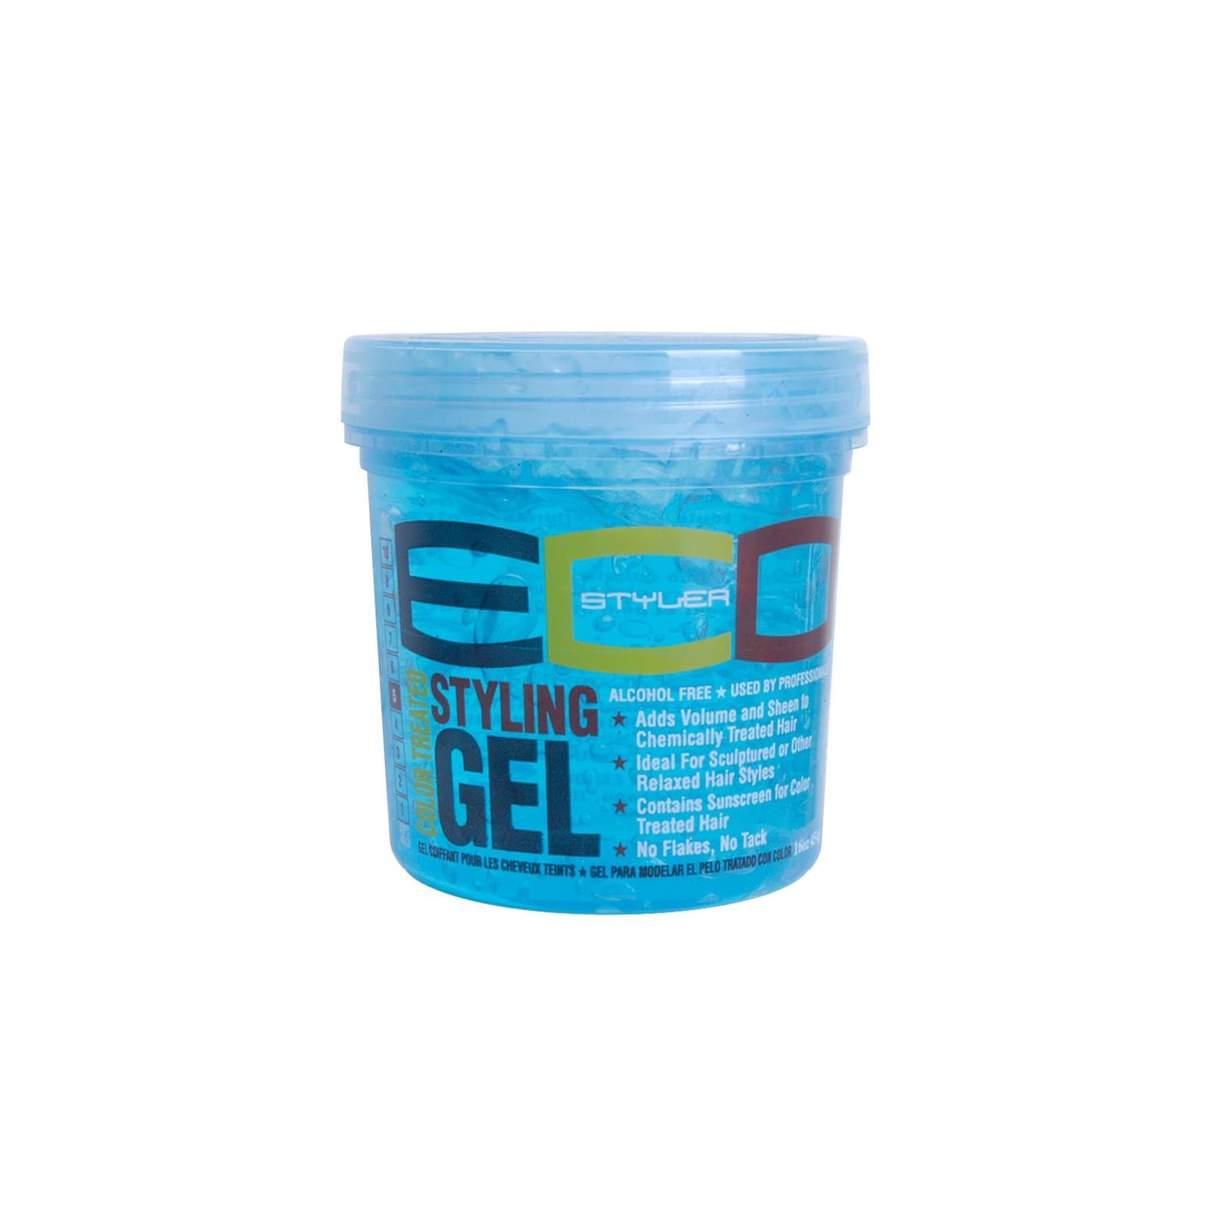 Eco Style Blue Sport Hair Styling Gel with Maximum Hold, 8 Oz